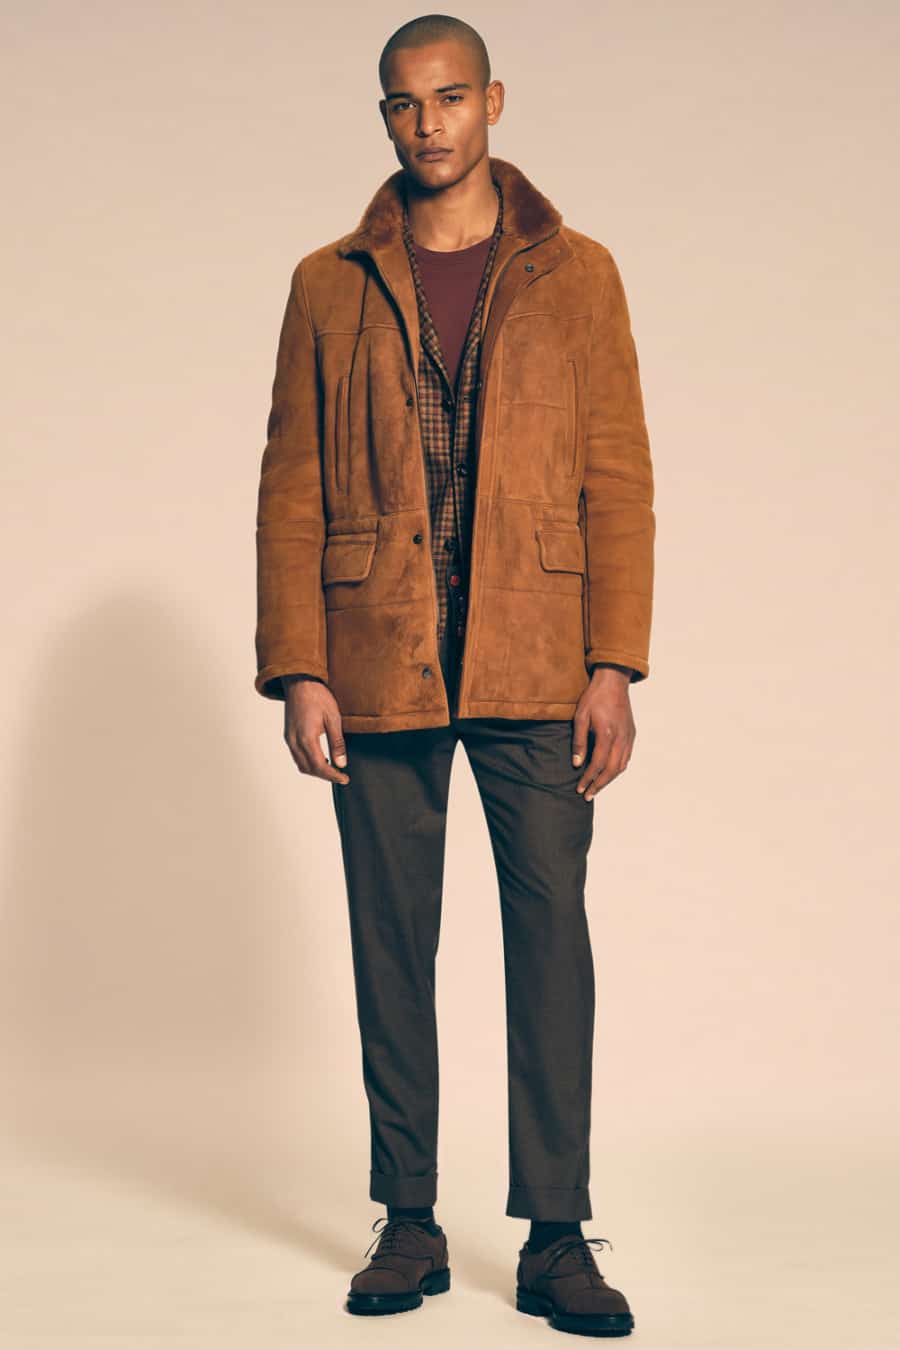 Men's grey pants, burgundy top, brown check blazer, tan sheepskin suede coat and brown suede shoes outfit